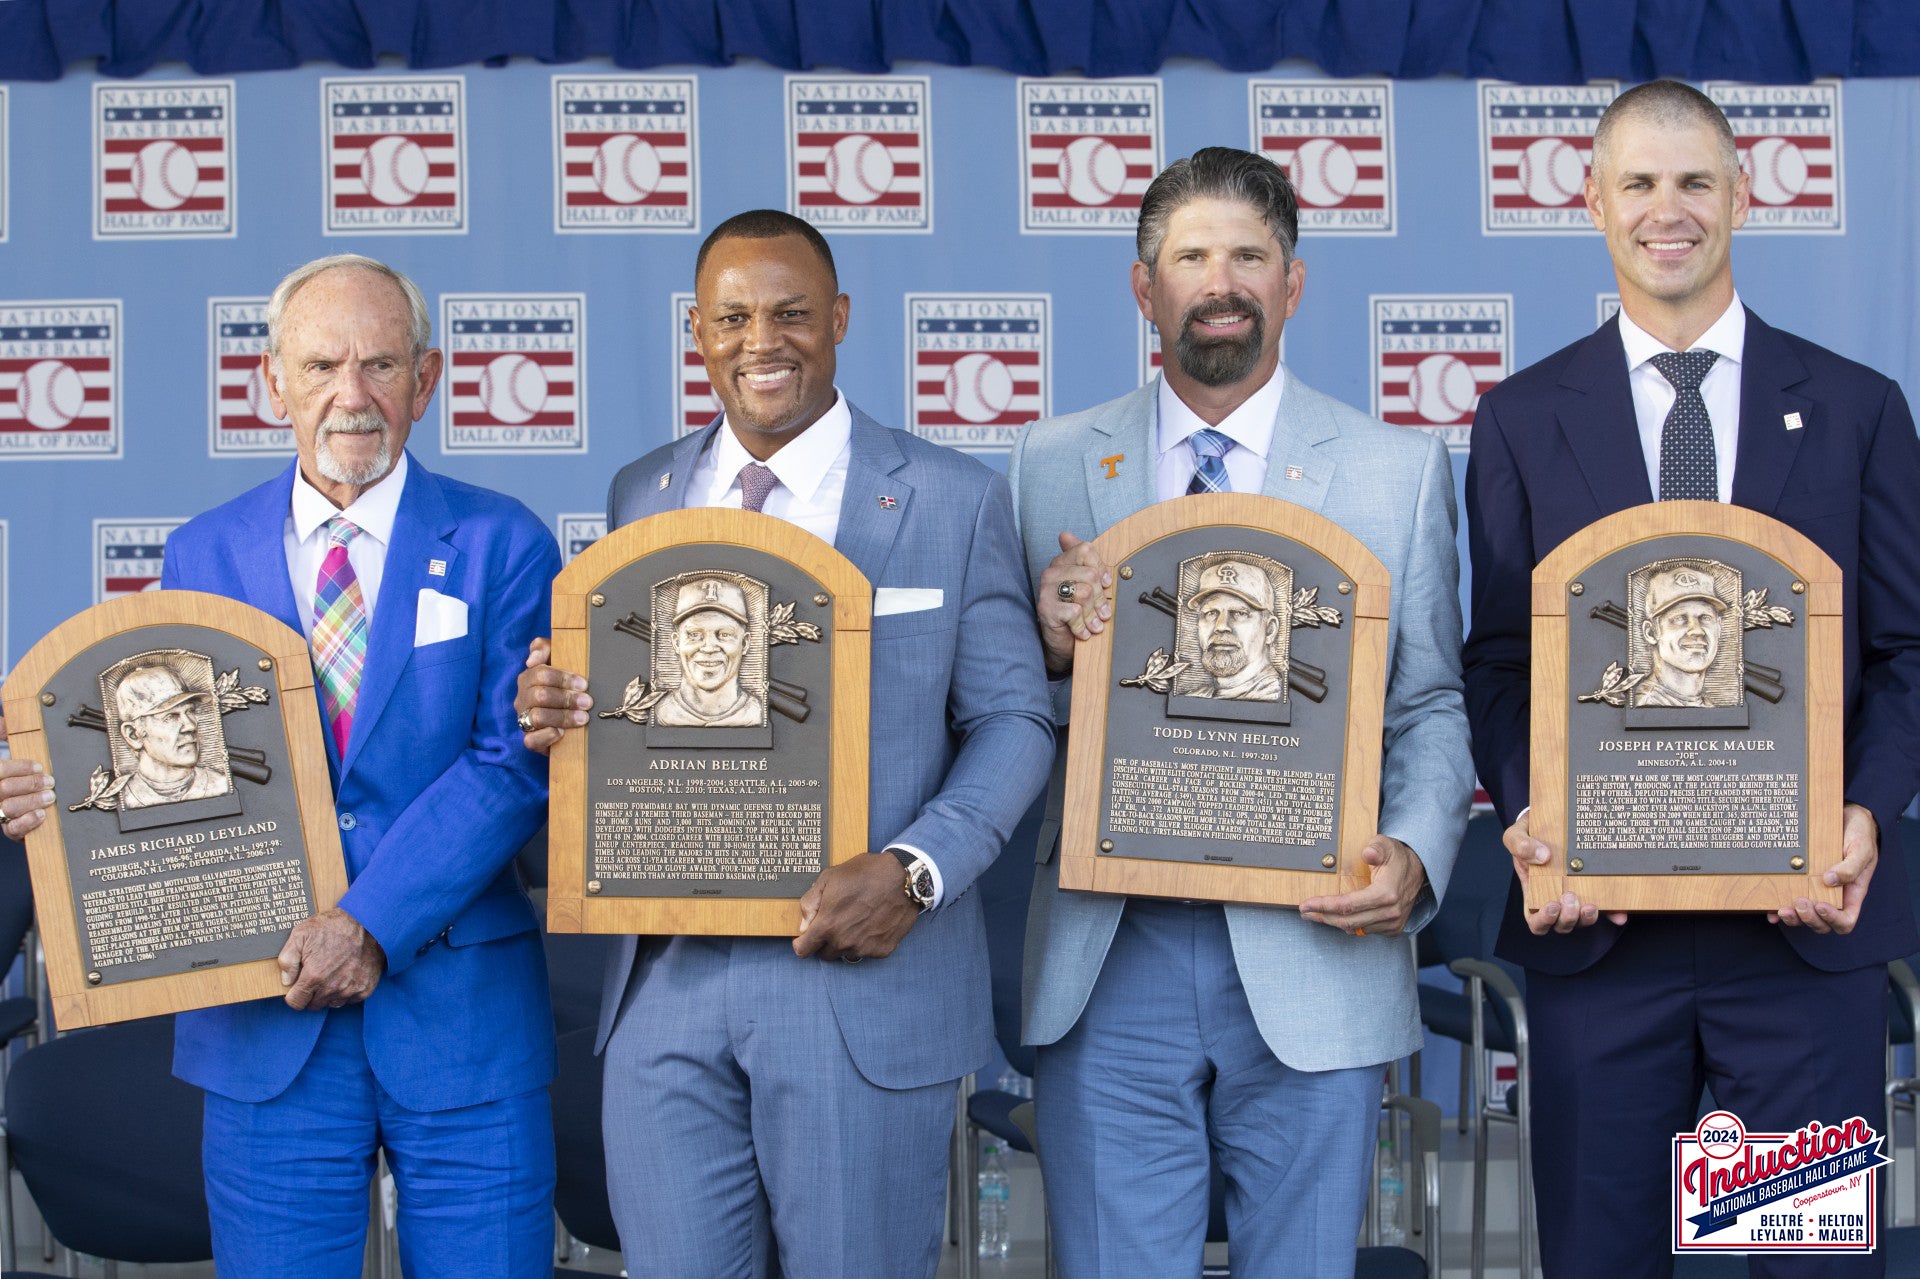 L-R: Jim Leyland, Adrian Beltre, Todd Helton and Joe Mauer with their Hall of Fame plaques